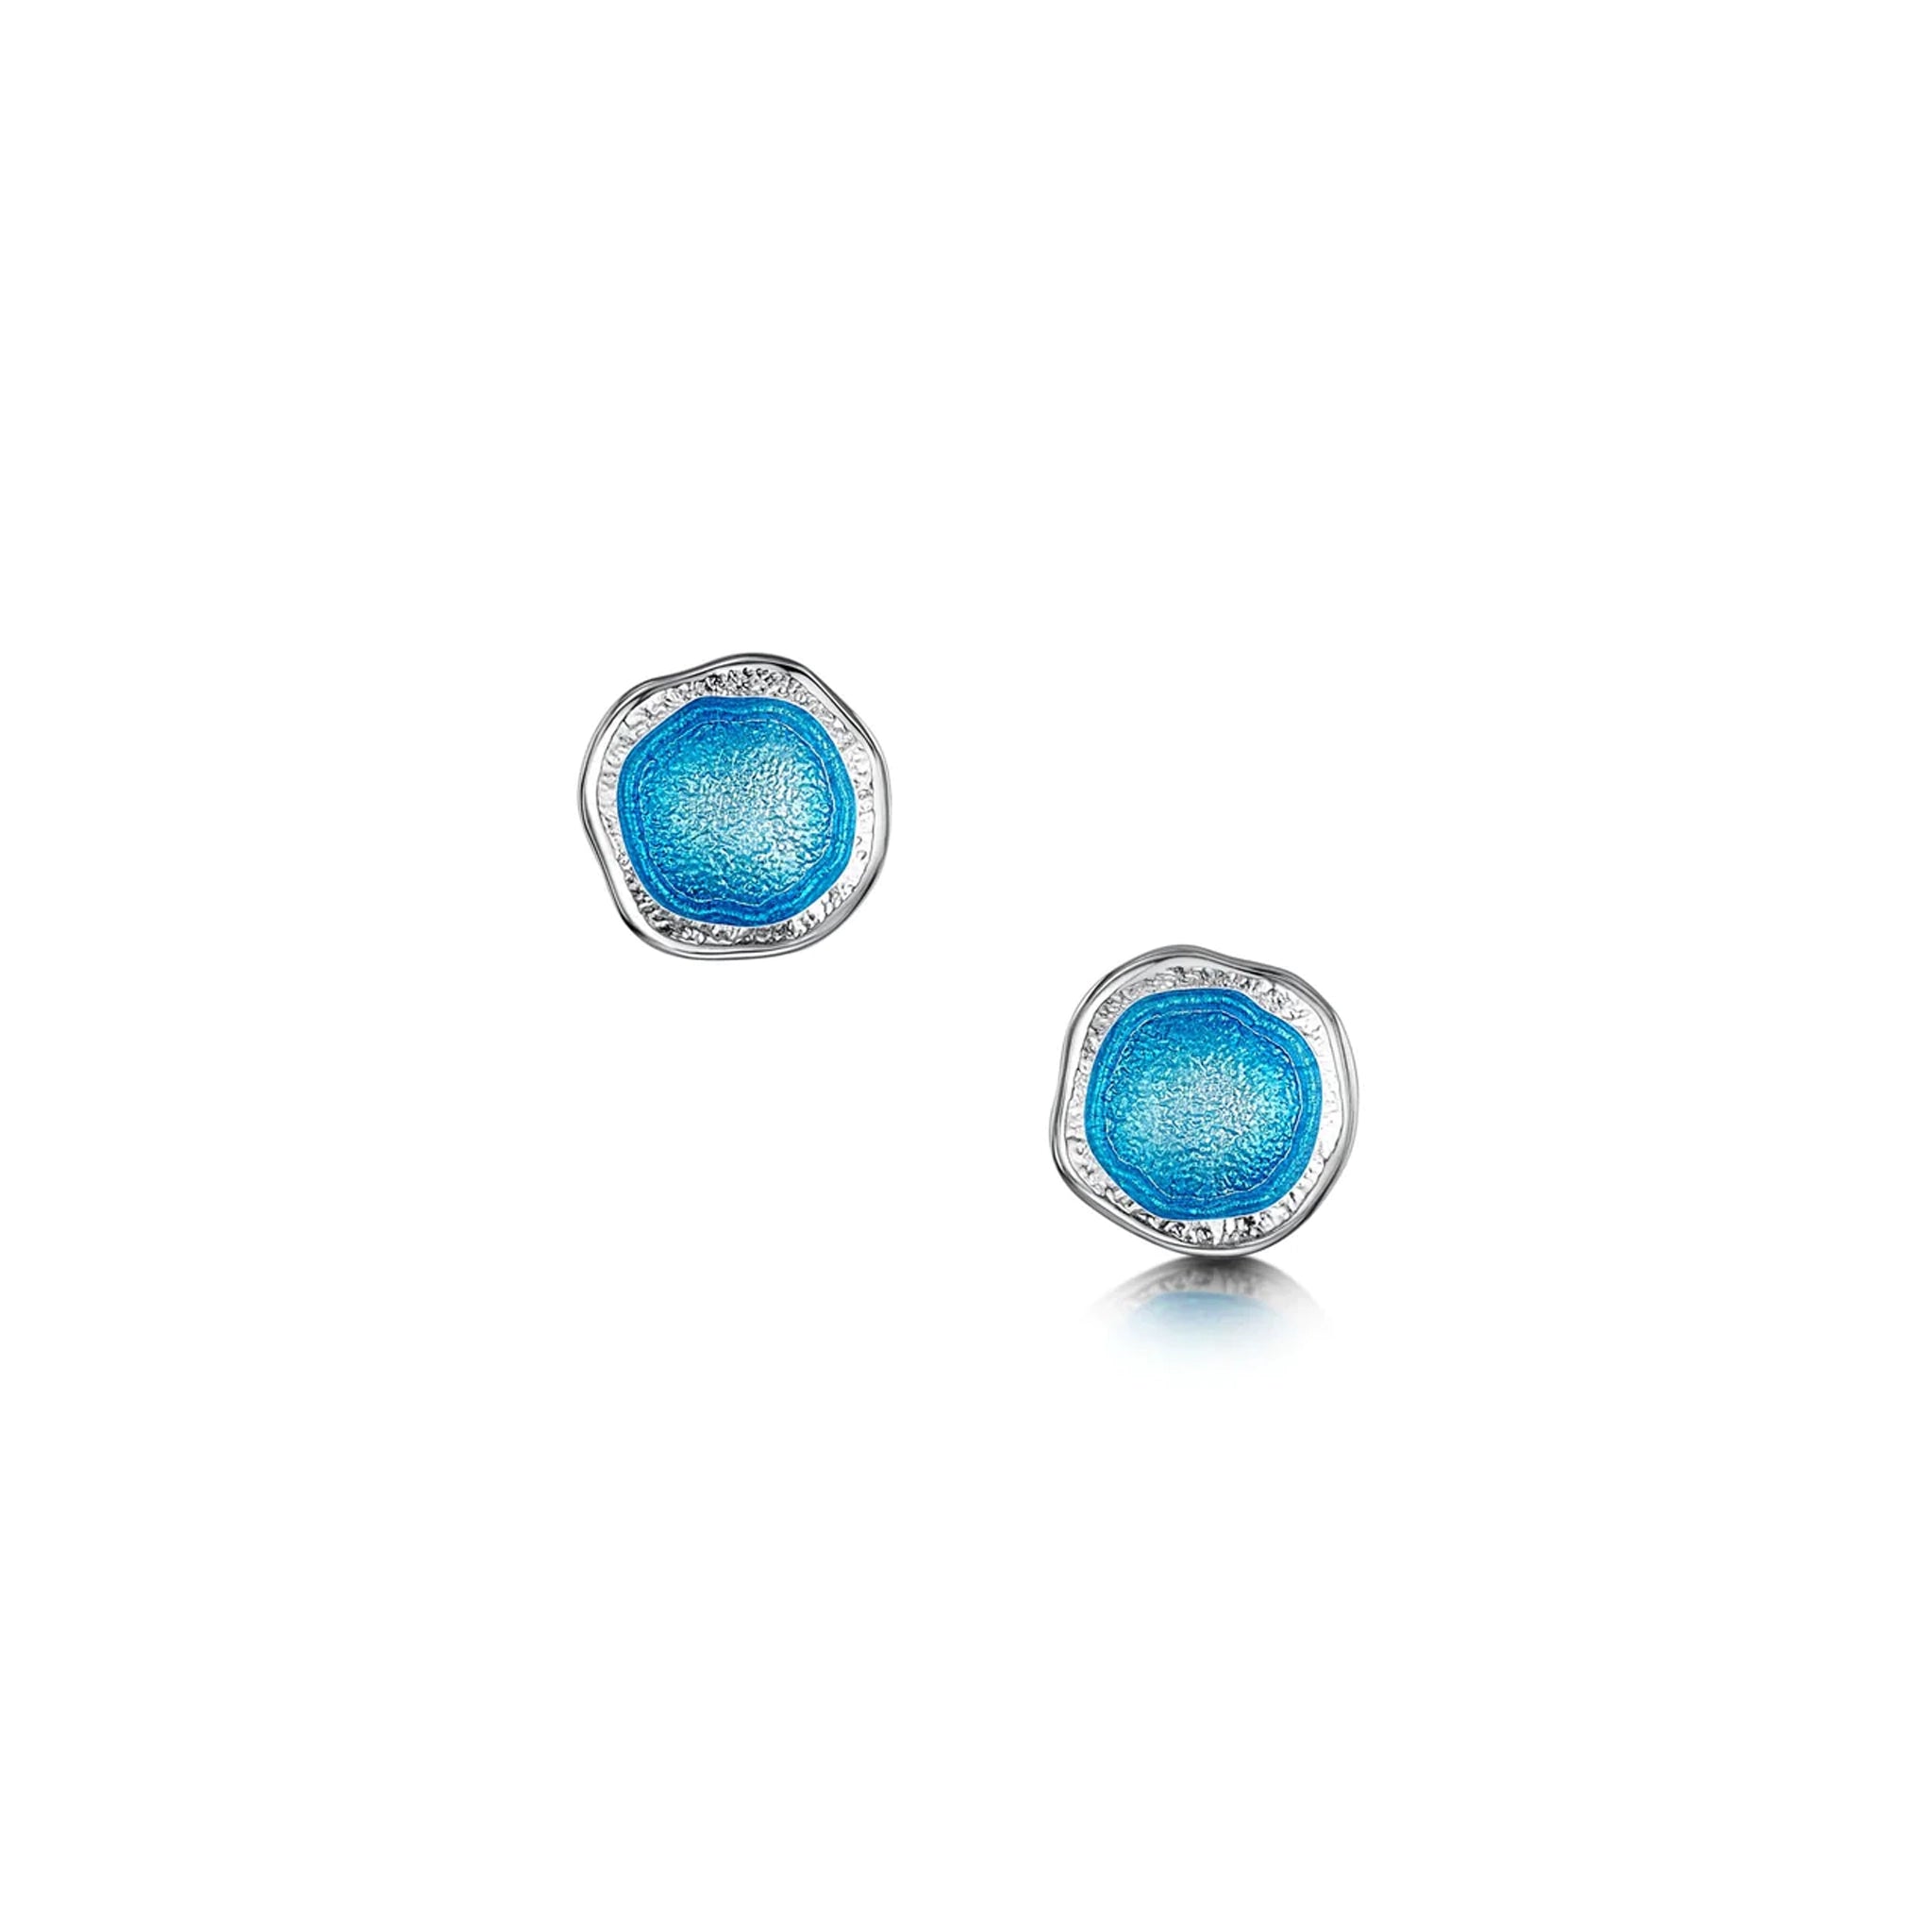 Silver round stud earrings with irregular and organic shape, subtle texture and bright blue enamelled centres